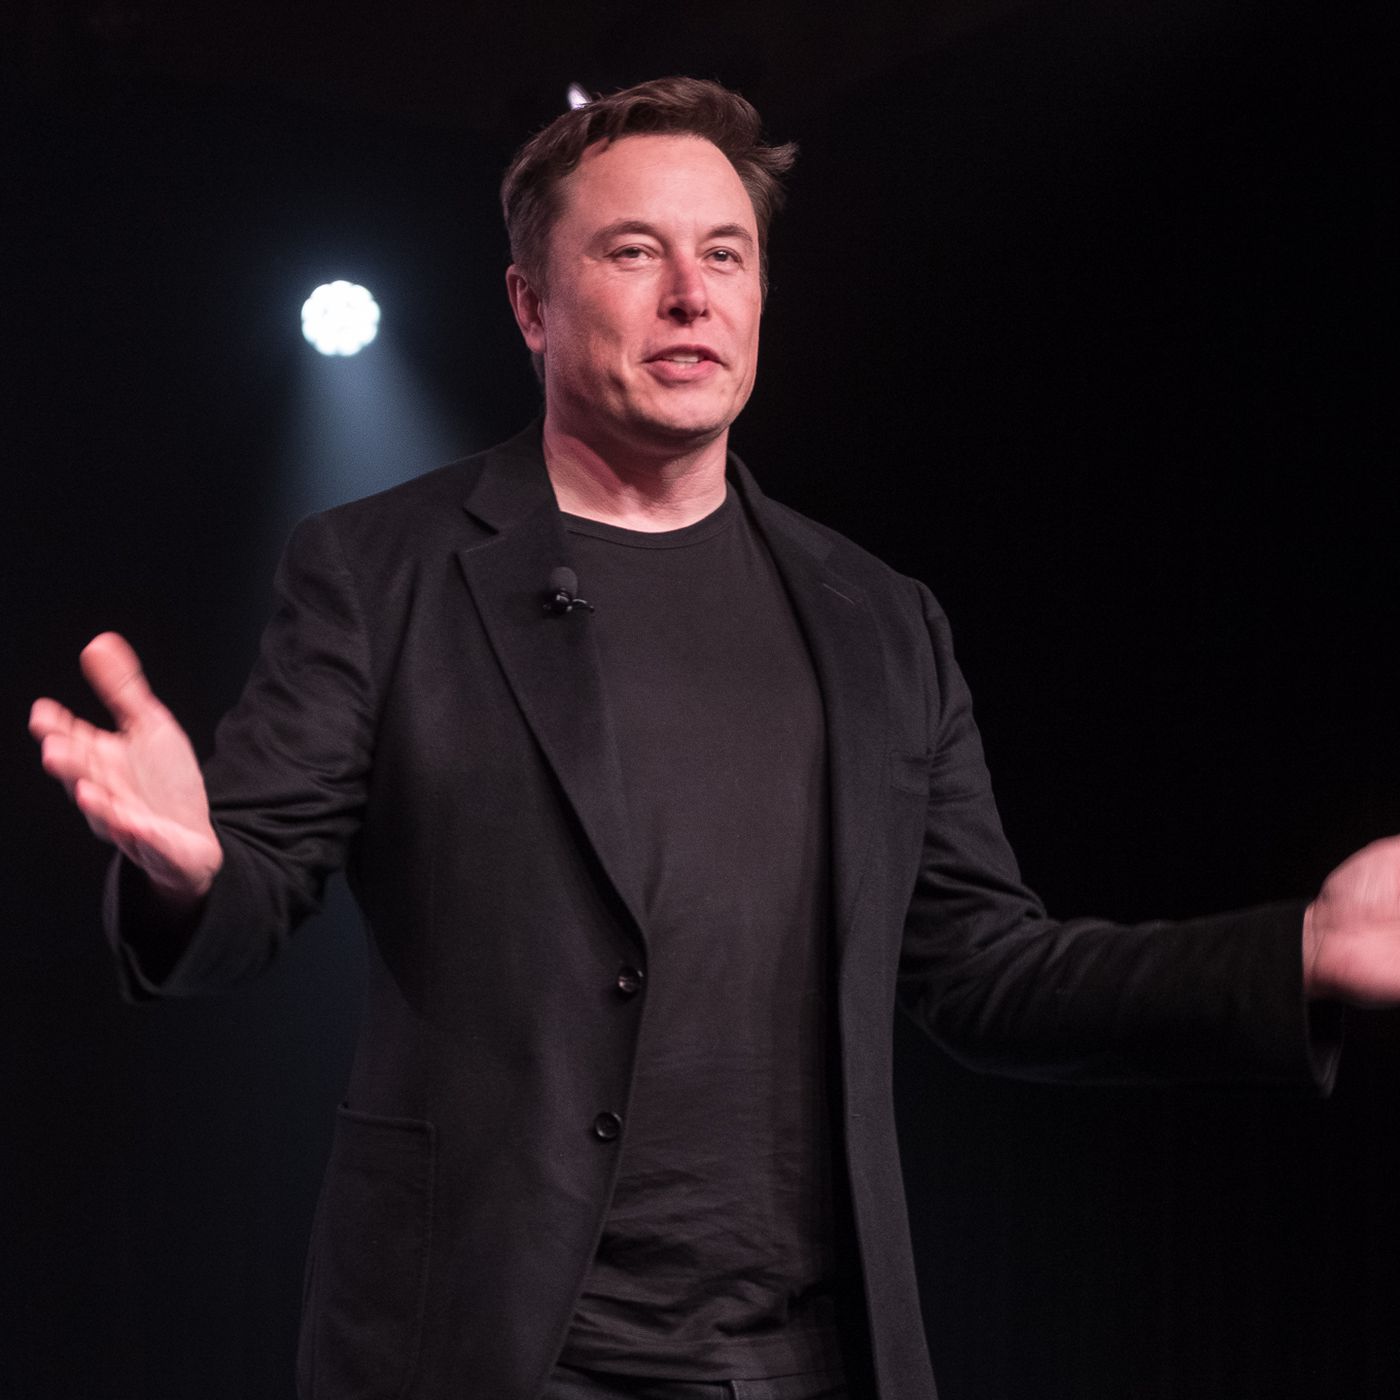 Tesla and SpaceX founder Elon Musk Quits Twitter